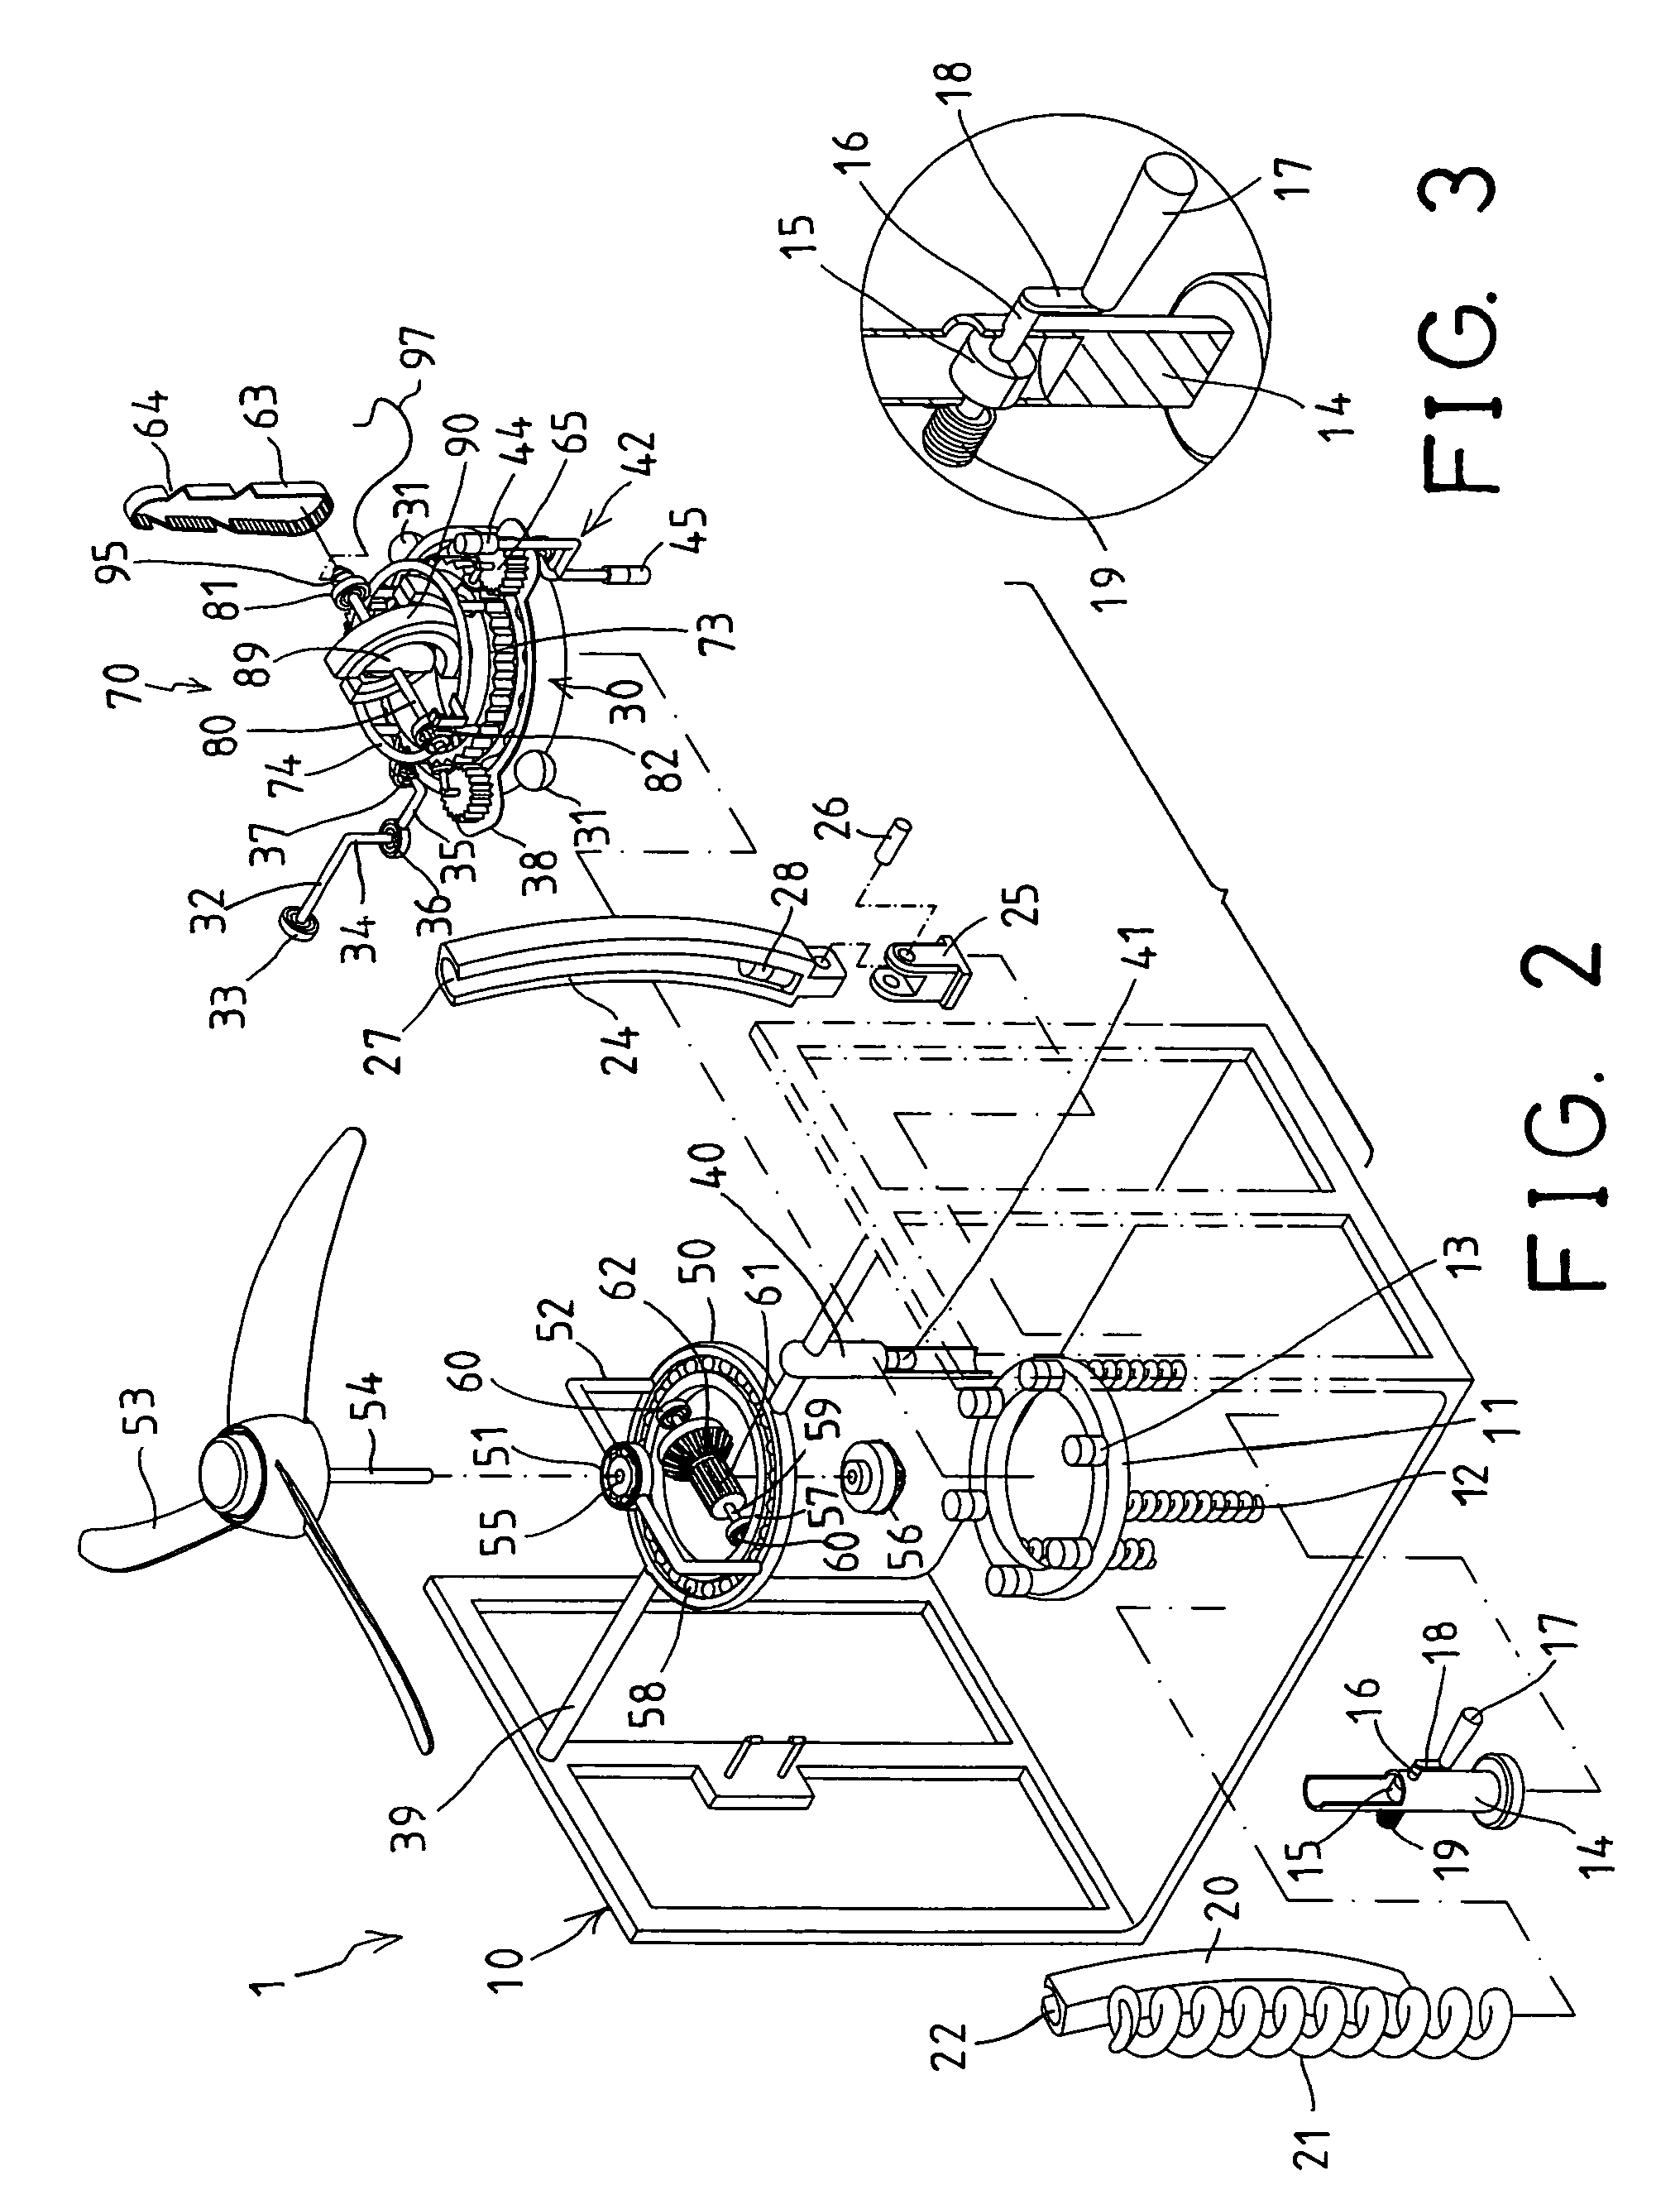 Magnetically operated fan device